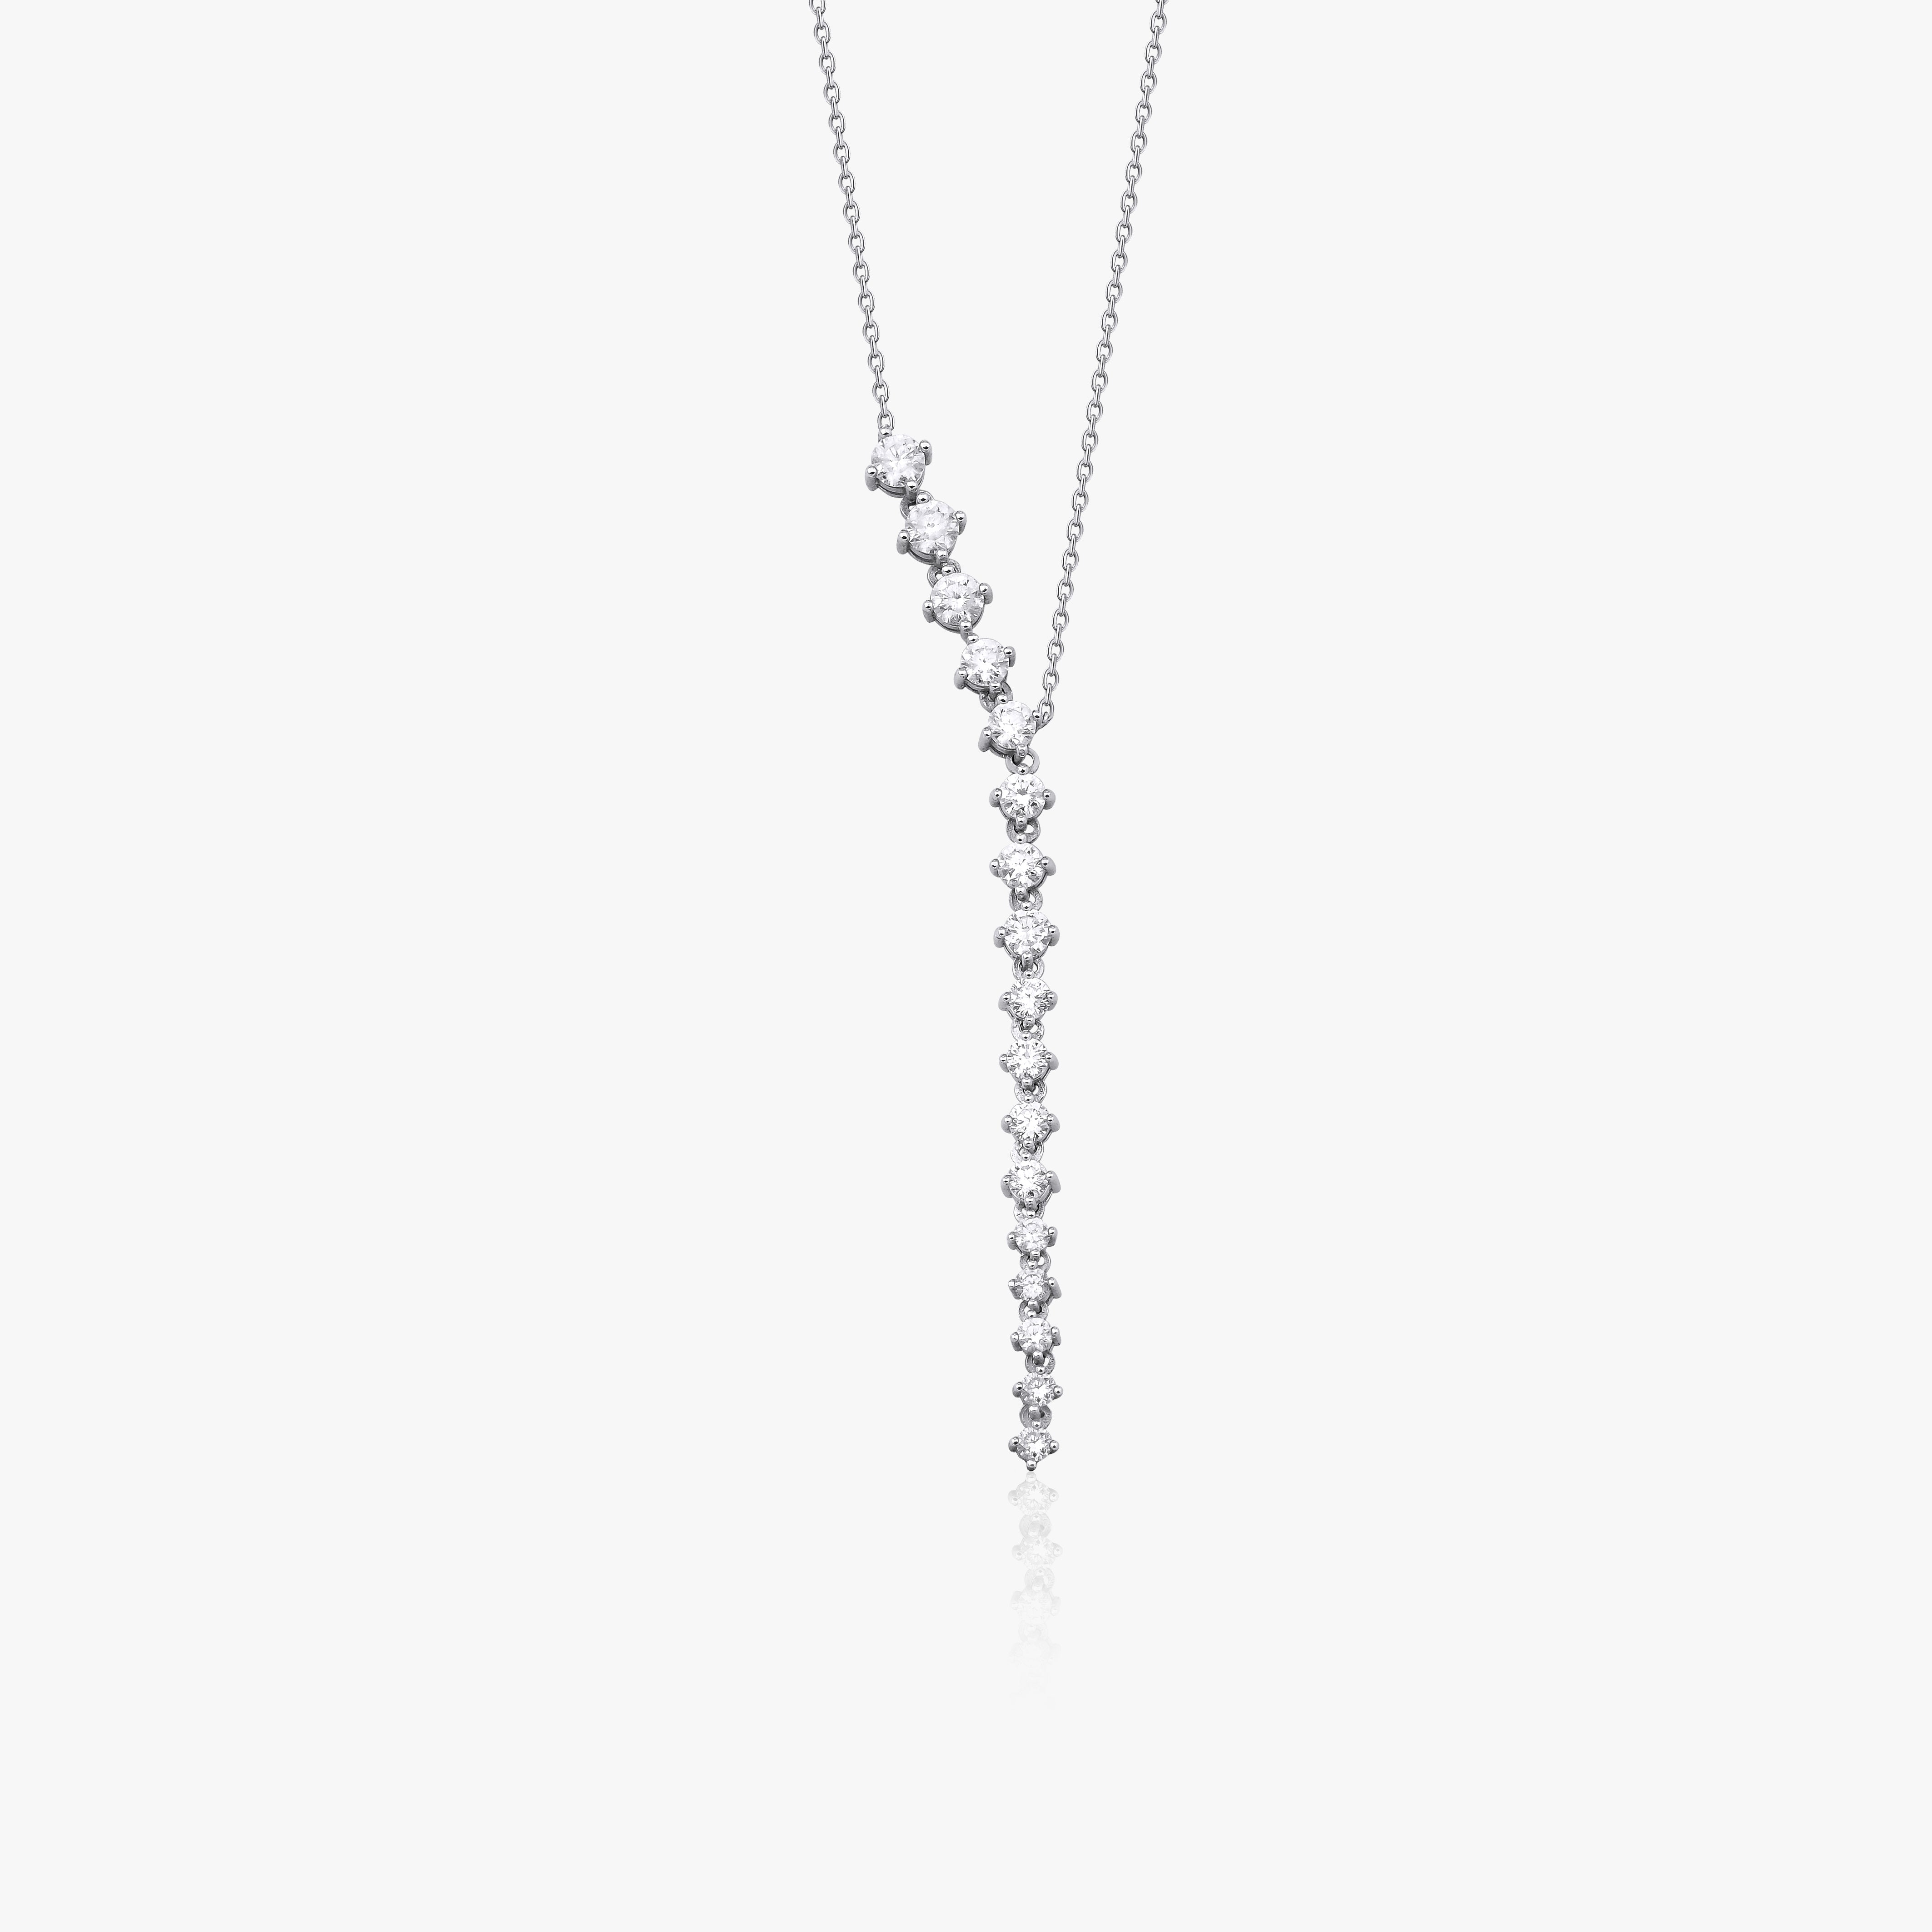 Diamond Lariat Necklace Available in 14K and 18K Gold